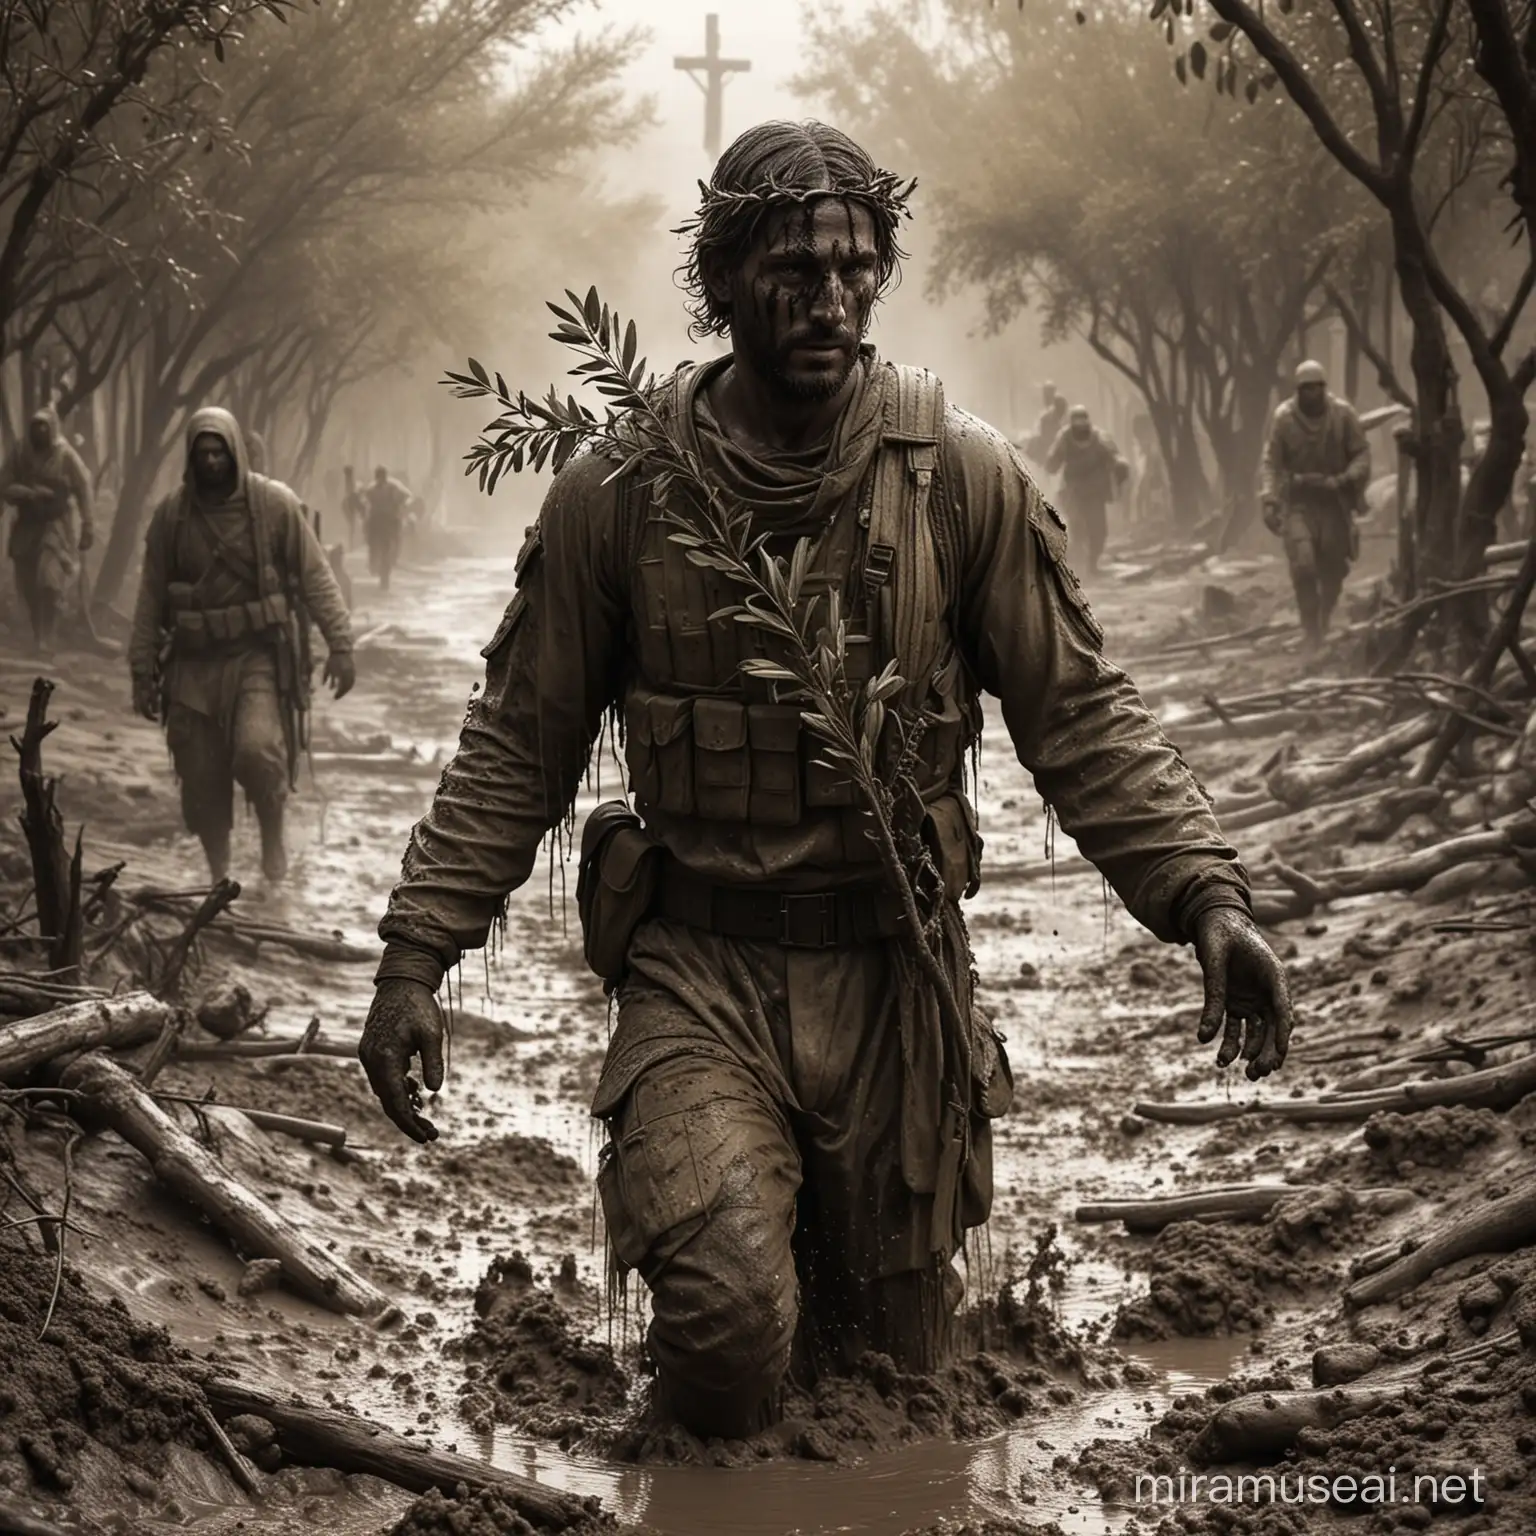 Thermal Camera effect, soldier emerges from the mud with an olive branch in his hands hyper realistic, cinematic shot, 40k, , military outfit, His body covered in mud
In the background we can see the crucified Jesus crying